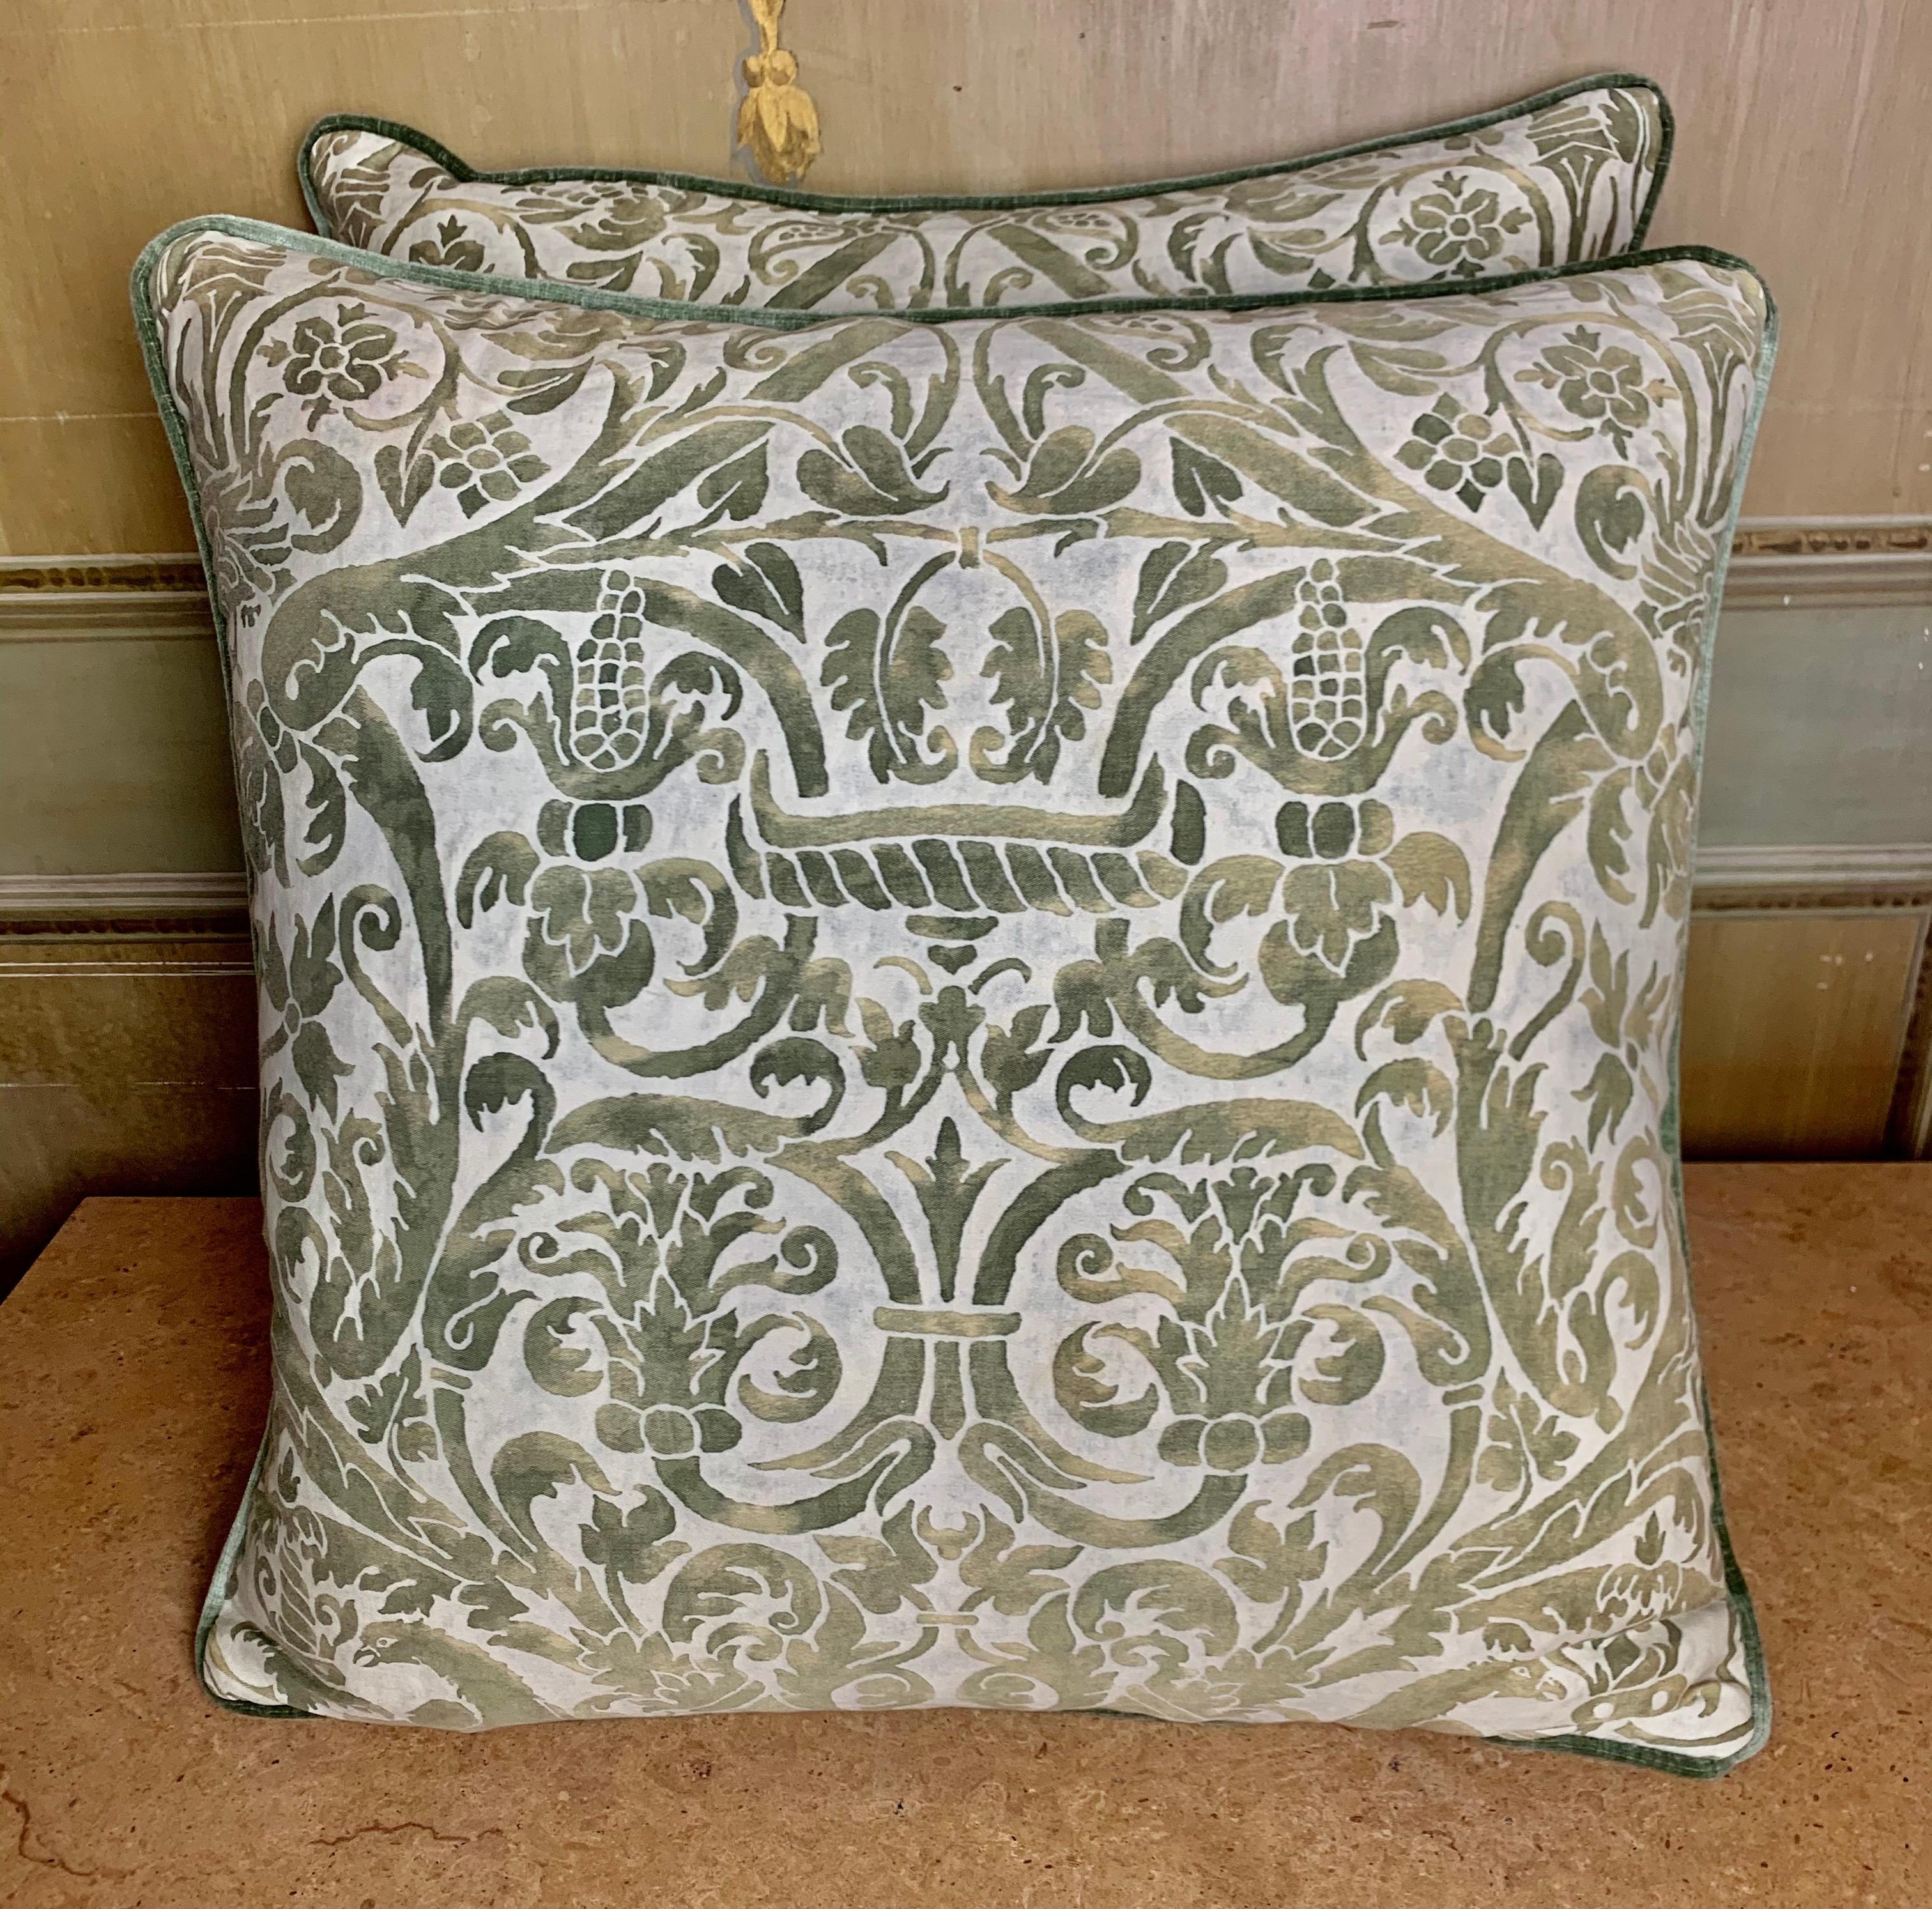 Pair of custom pillows made by Melissa Levinson with authentic green and white Fortuny textile cotton fronts and green velvet backs. Self cording, down inserts, sewn shut.